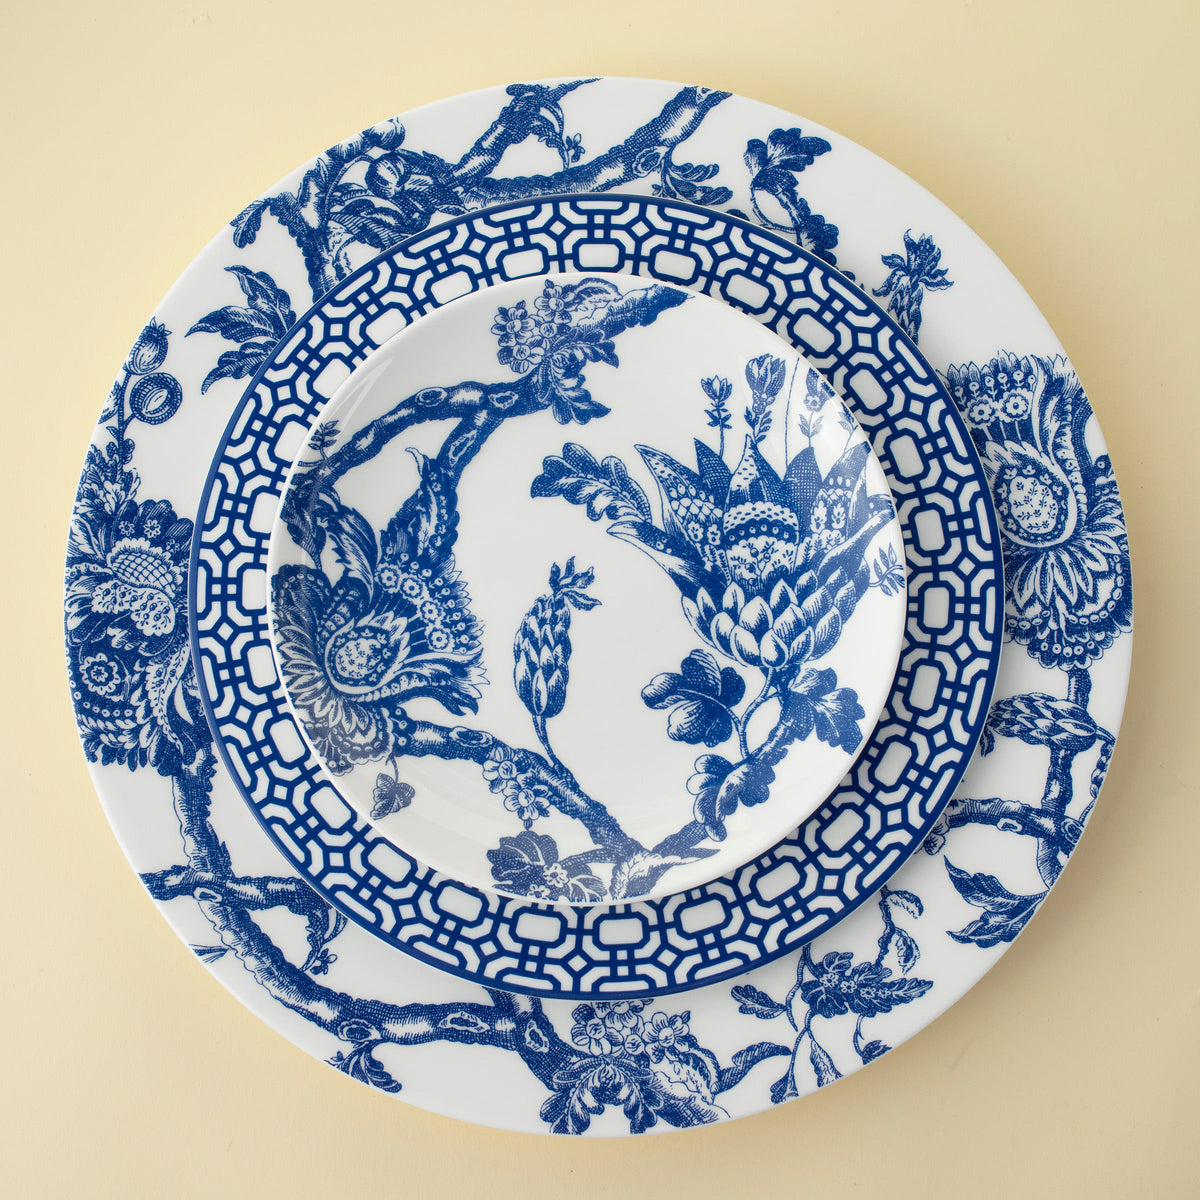 A Newport Garden Gate Salad Plate by Caskata Artisanal Home, featuring a contemporary blue and white color scheme and a floral pattern.